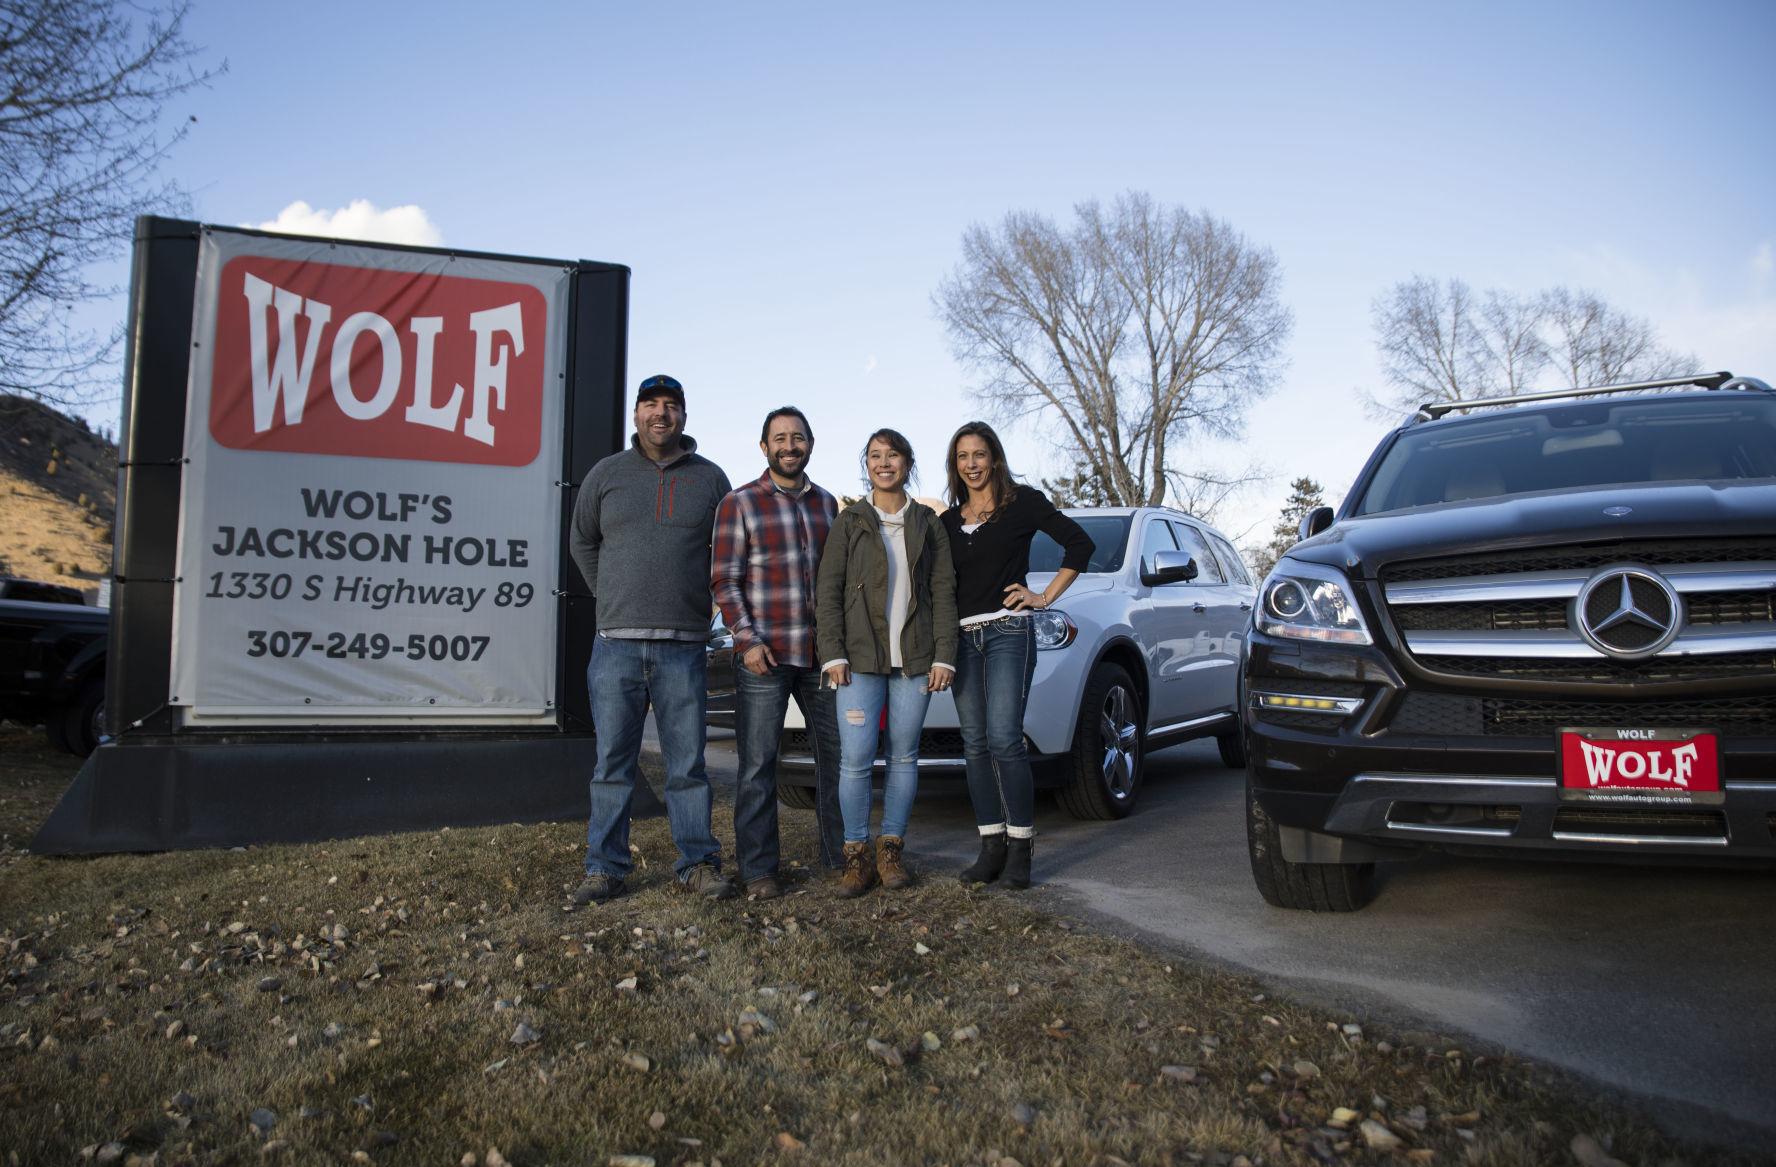 Wolf's Jackson Hole: Used cars for the people | Business